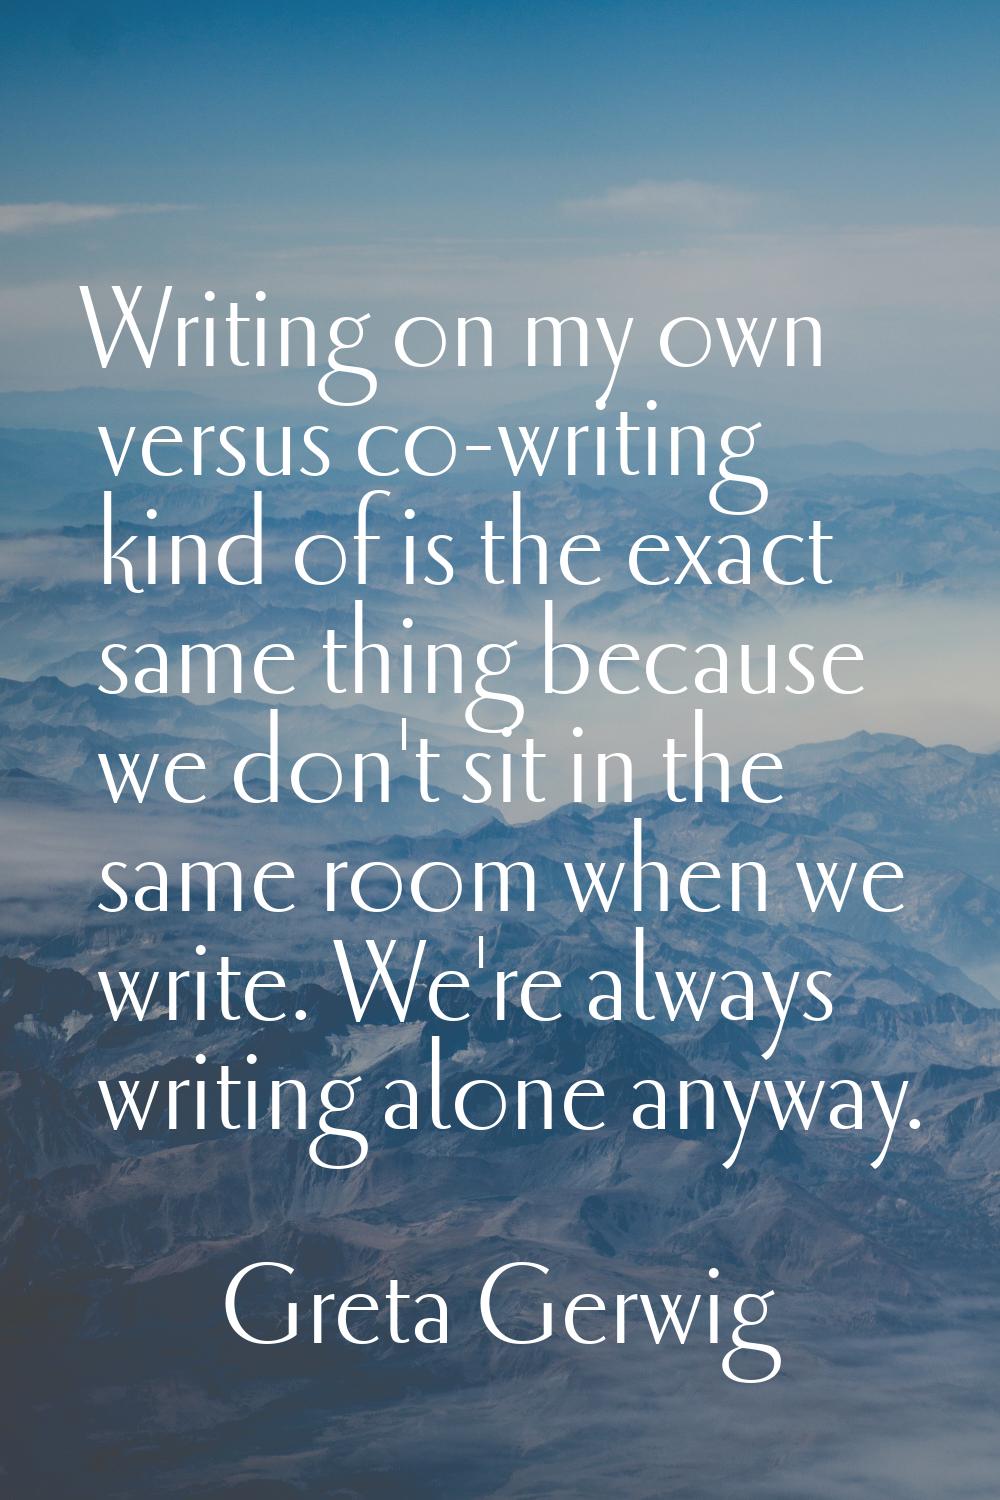 Writing on my own versus co-writing kind of is the exact same thing because we don't sit in the sam